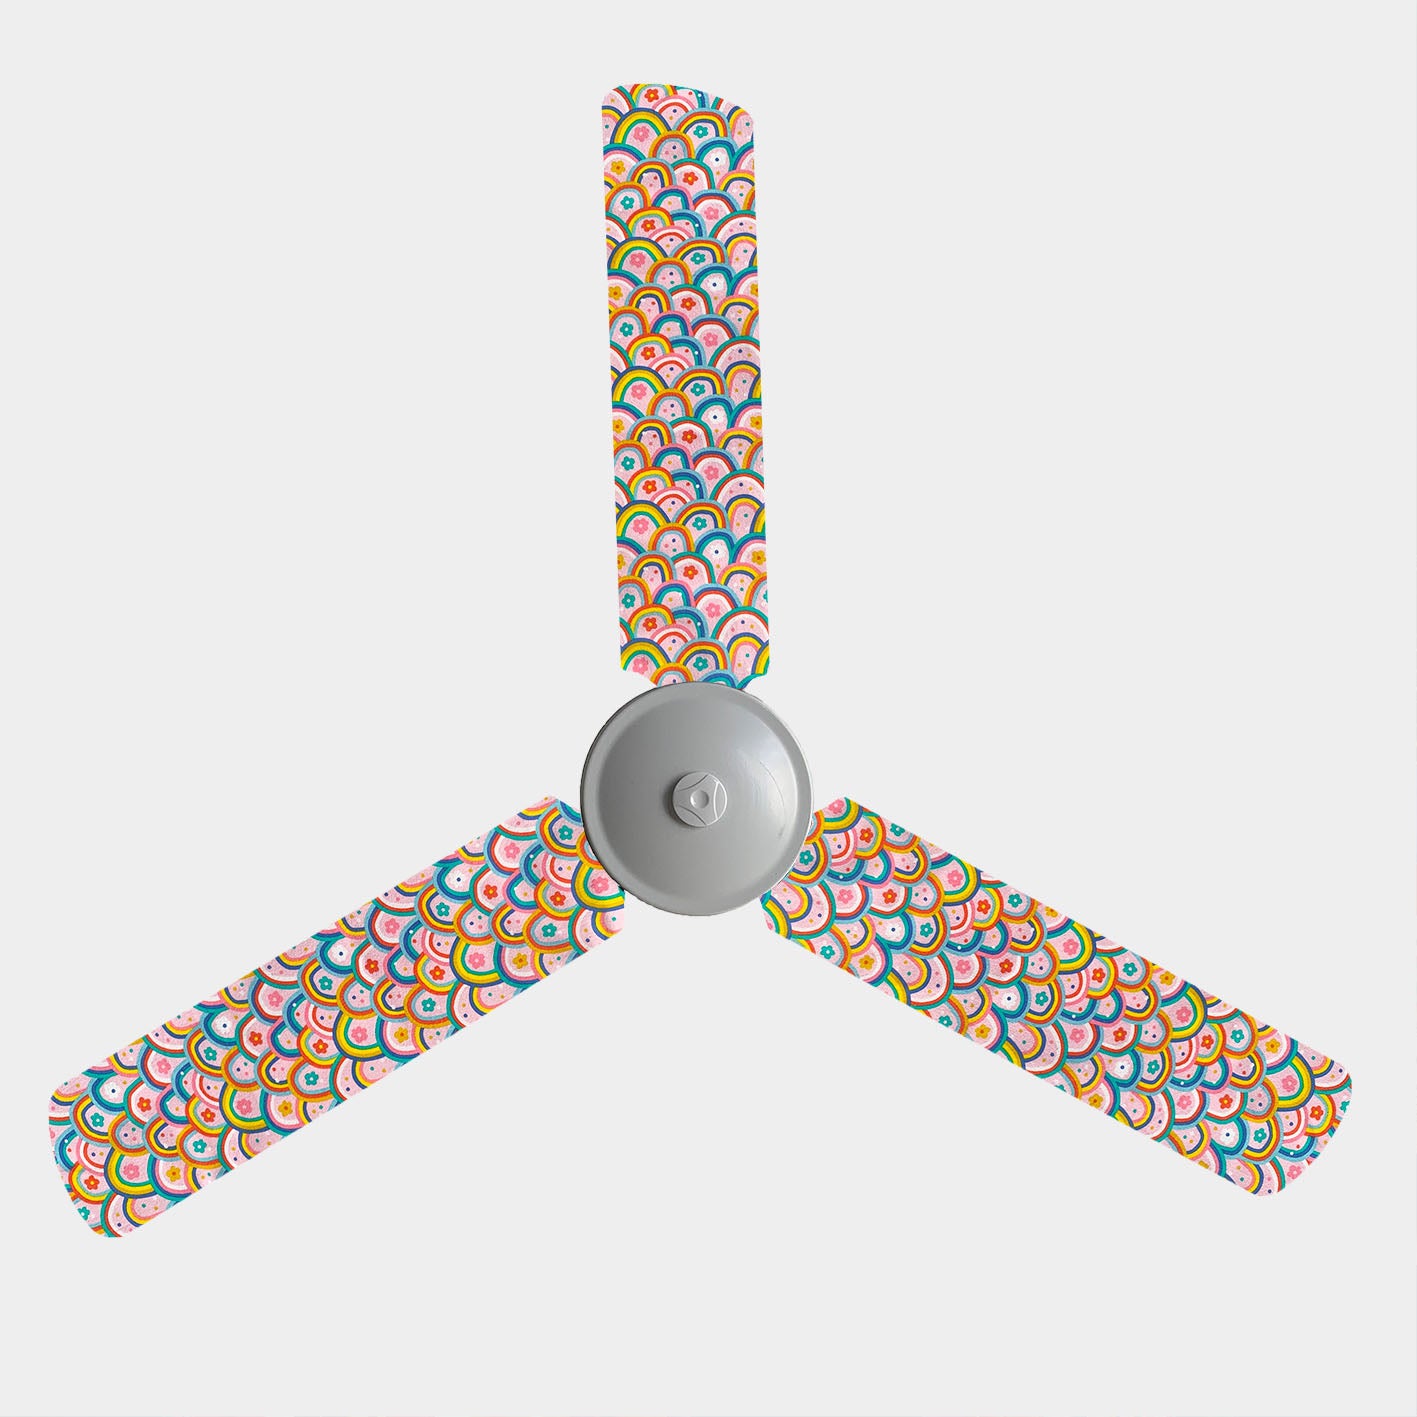 Ceiling fan covers with red, yellow, blue rainbows with small flowers on a pink background pattern